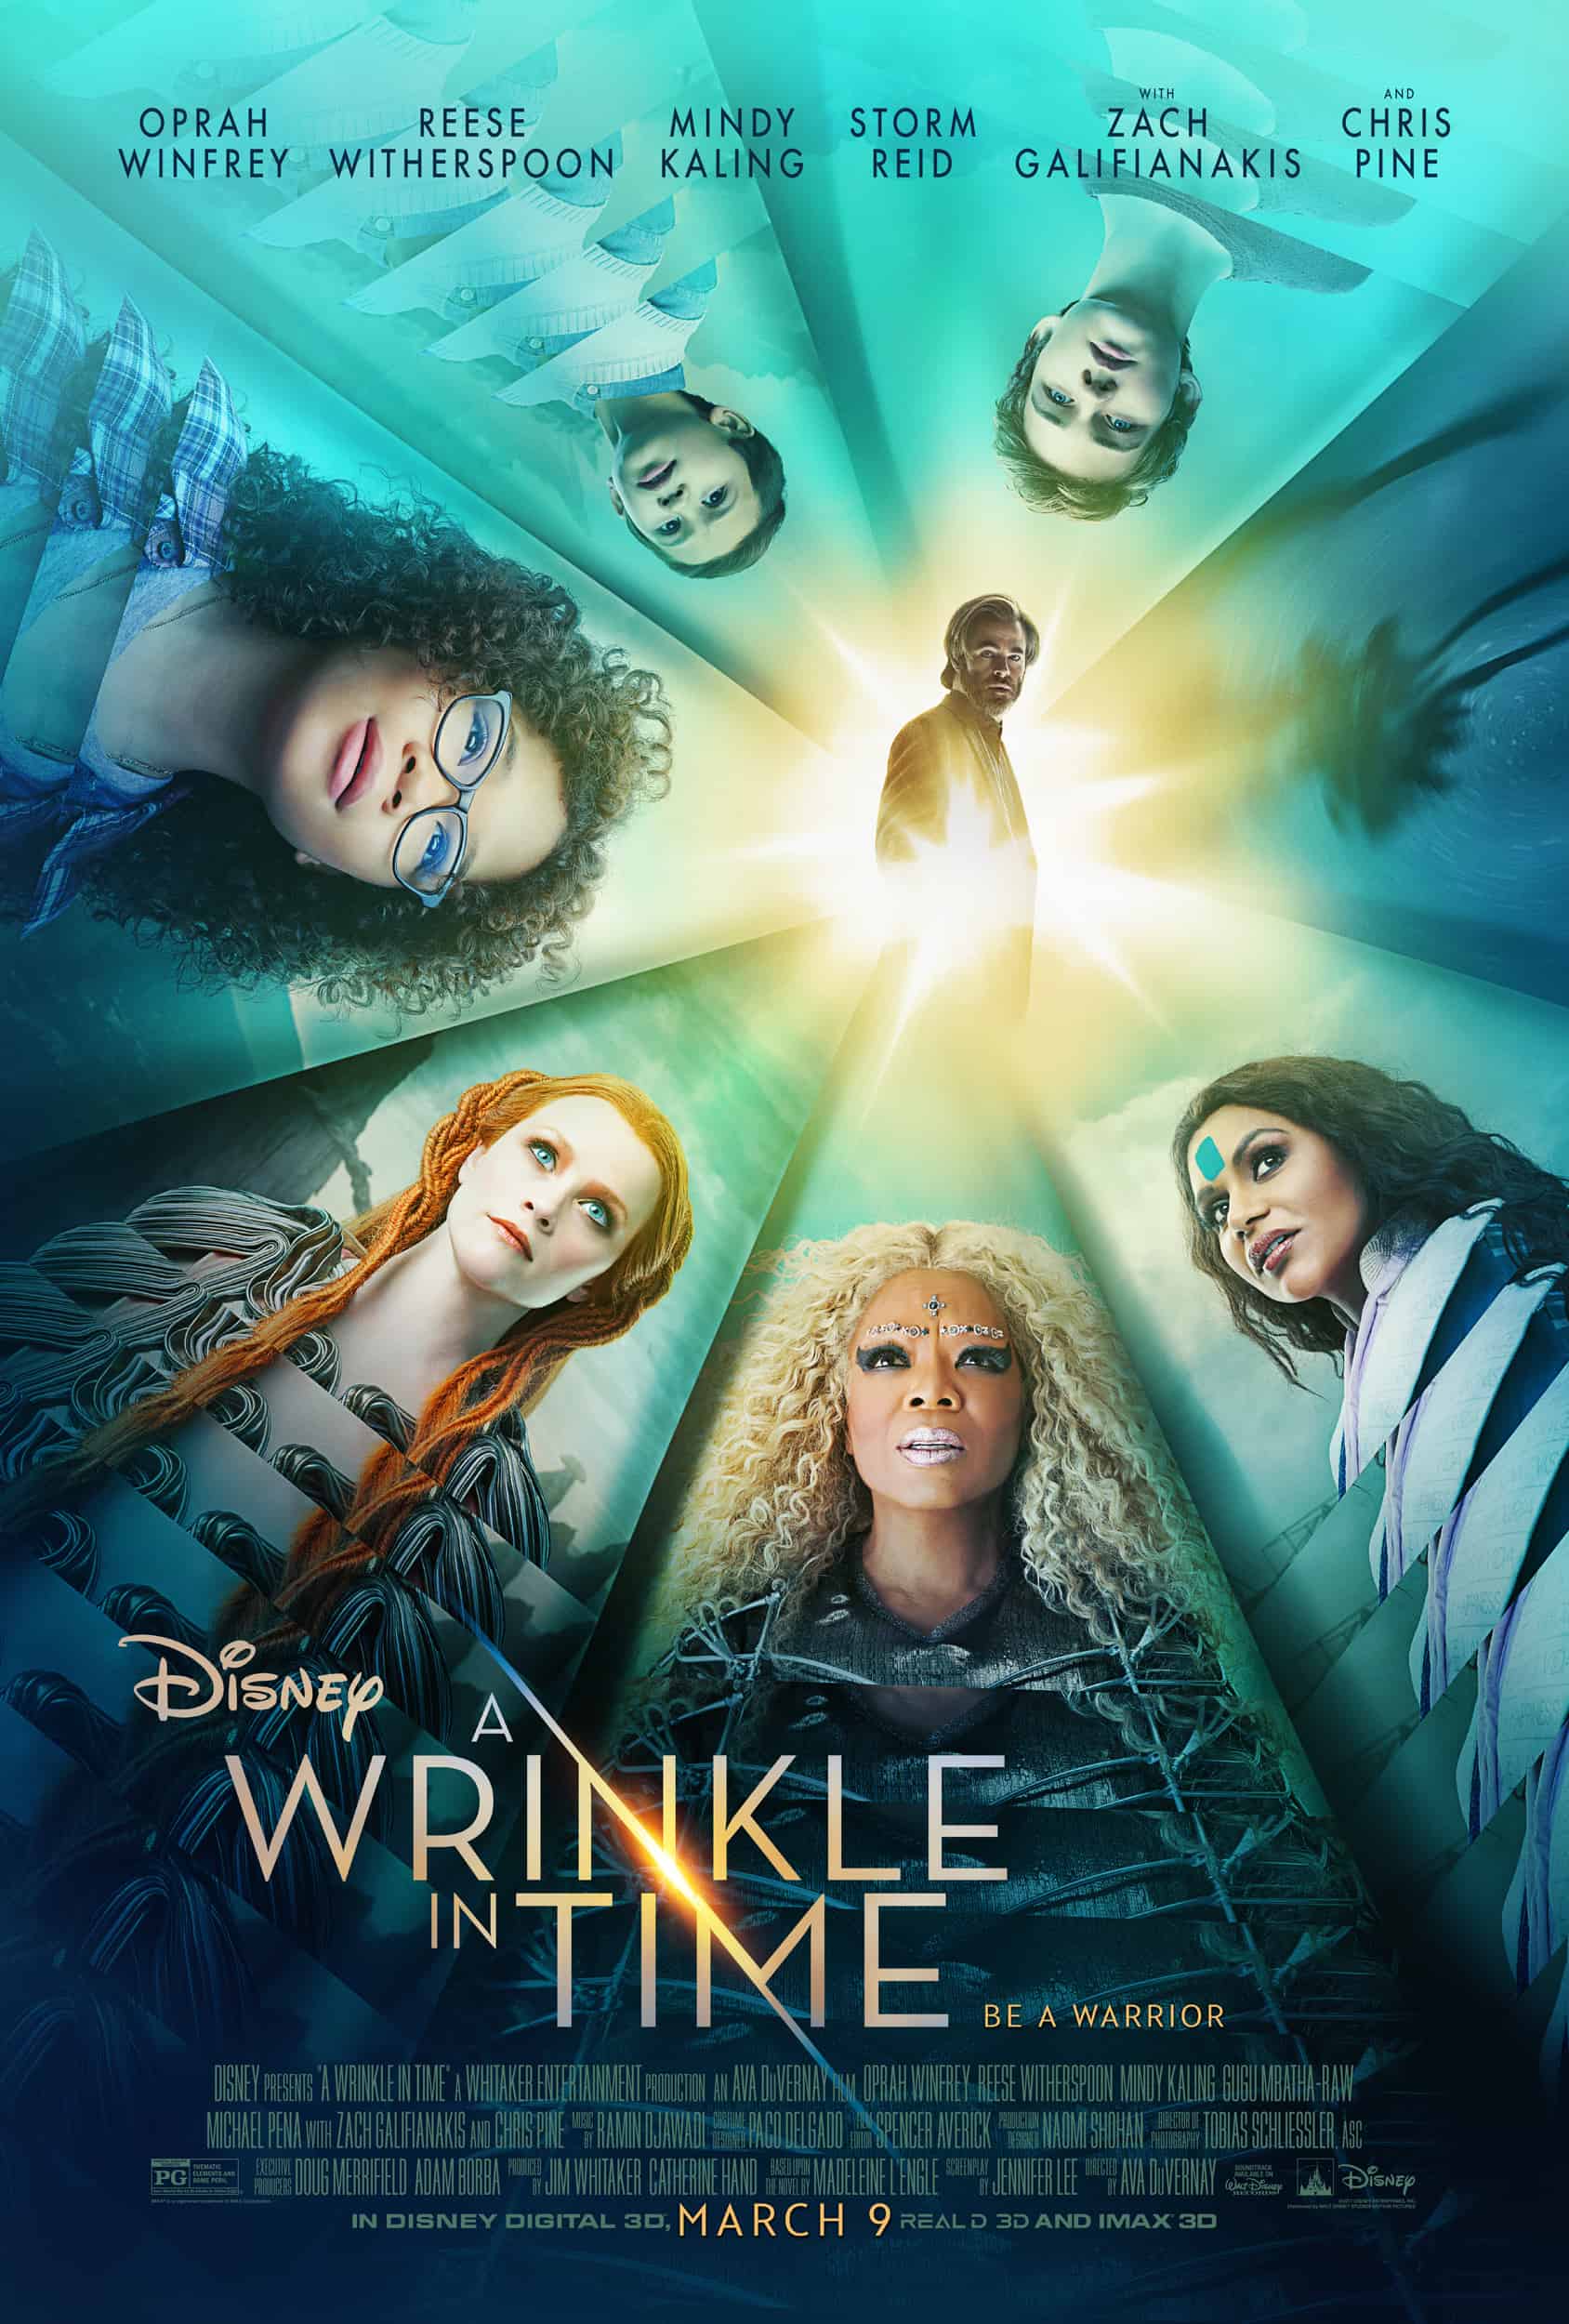 New A Wrinkle in Time Trailer and Poster